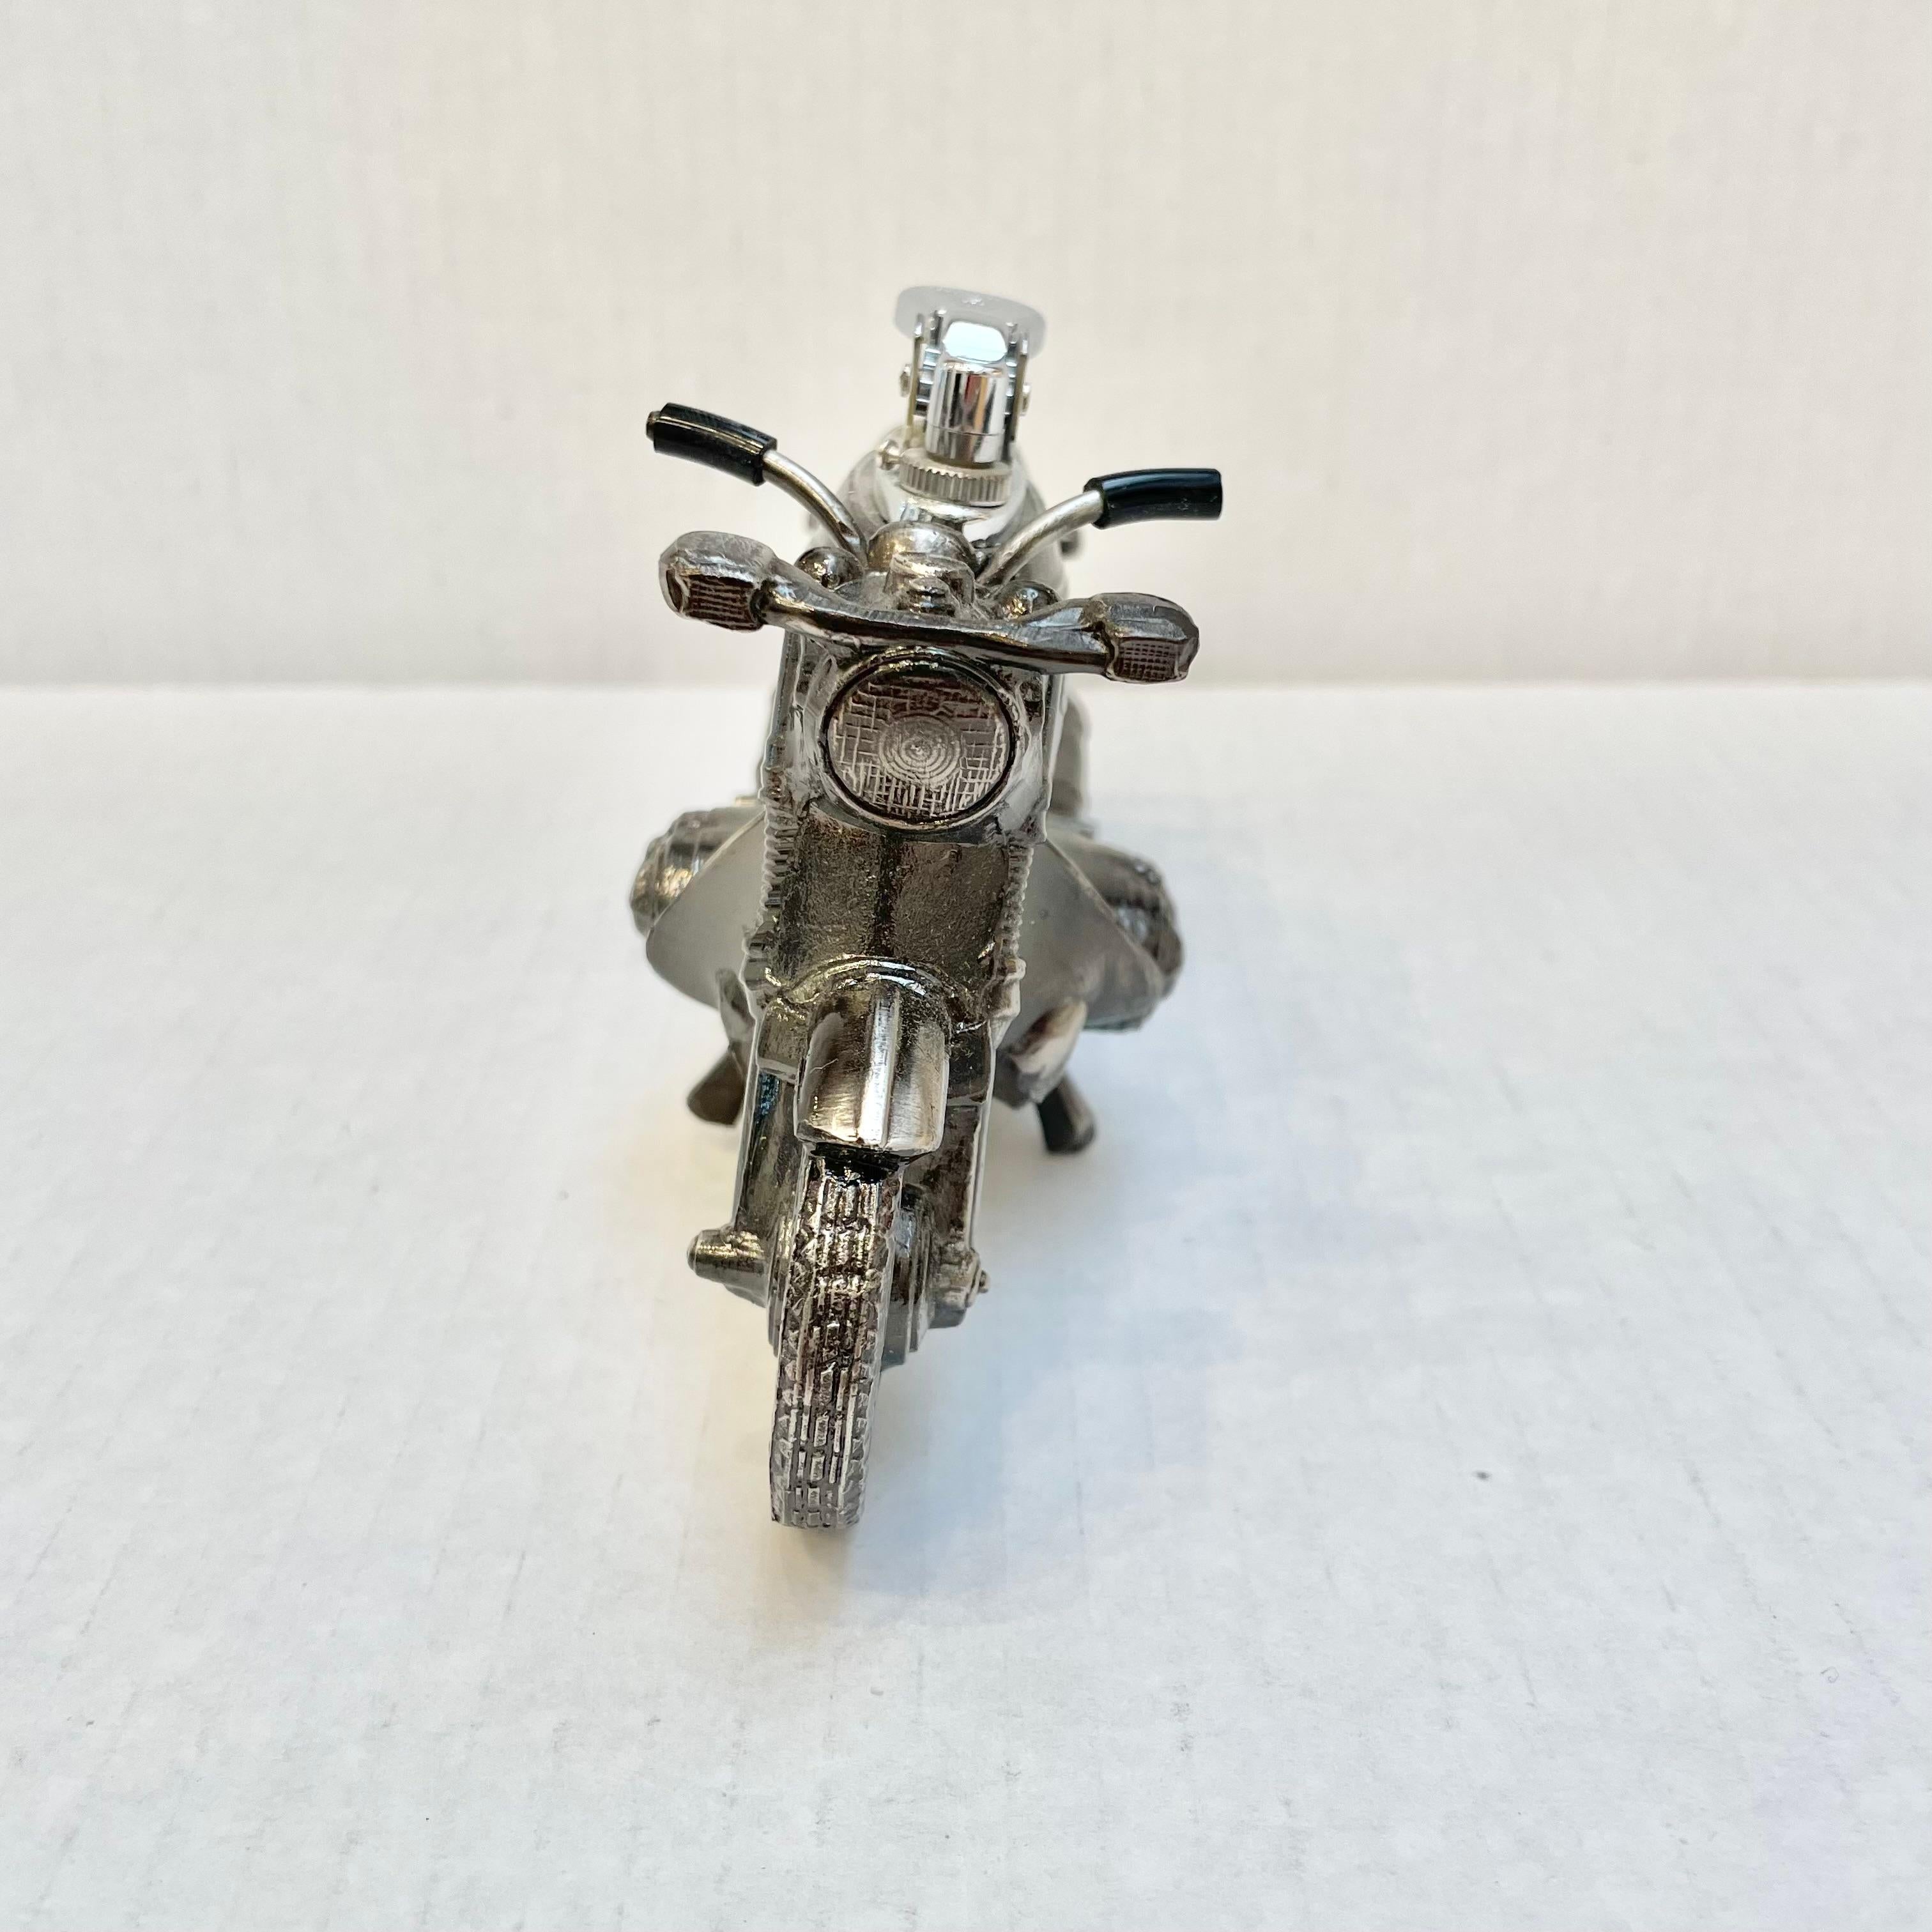 Cool vintage table lighter in the shape of a BMW cafe racer motorcycle. Made completely of metal with a hollow body. Beautiful burnished silver color with intricate details. Cool tobacco accessory and conversation piece. Working lighter. Very